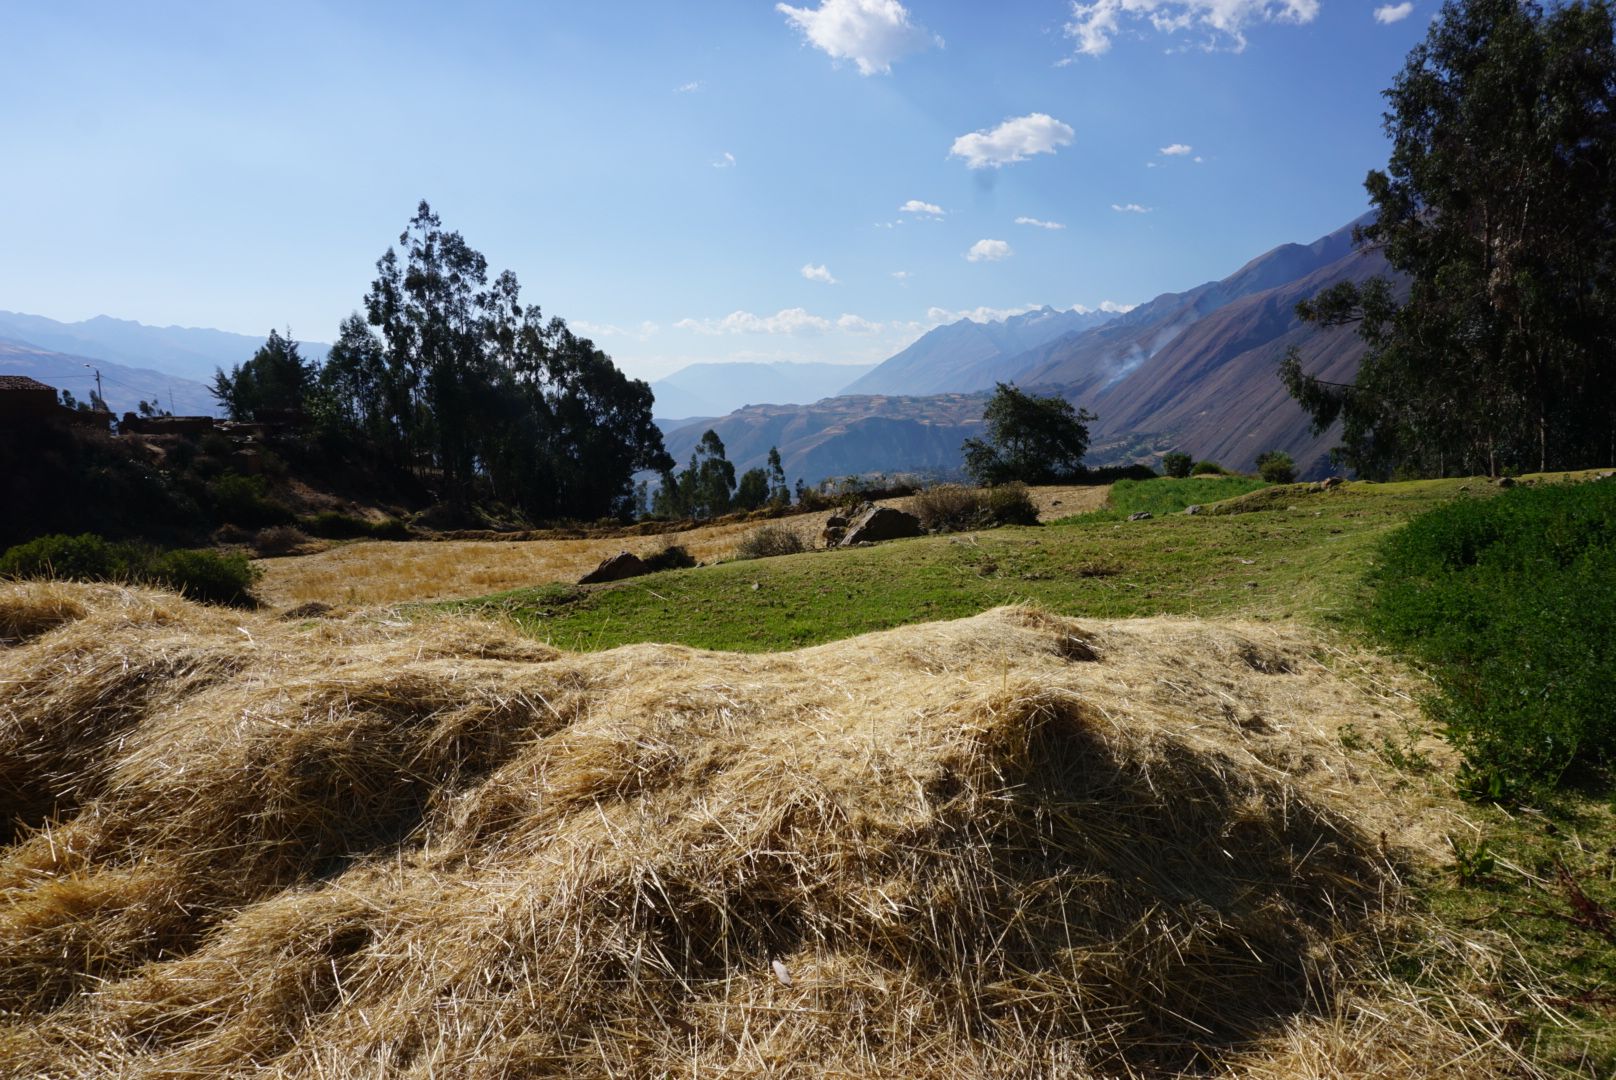 A pile of trigo, or wheat, on the Oros property. Image by Audrey Fromson. Peru, 2019.